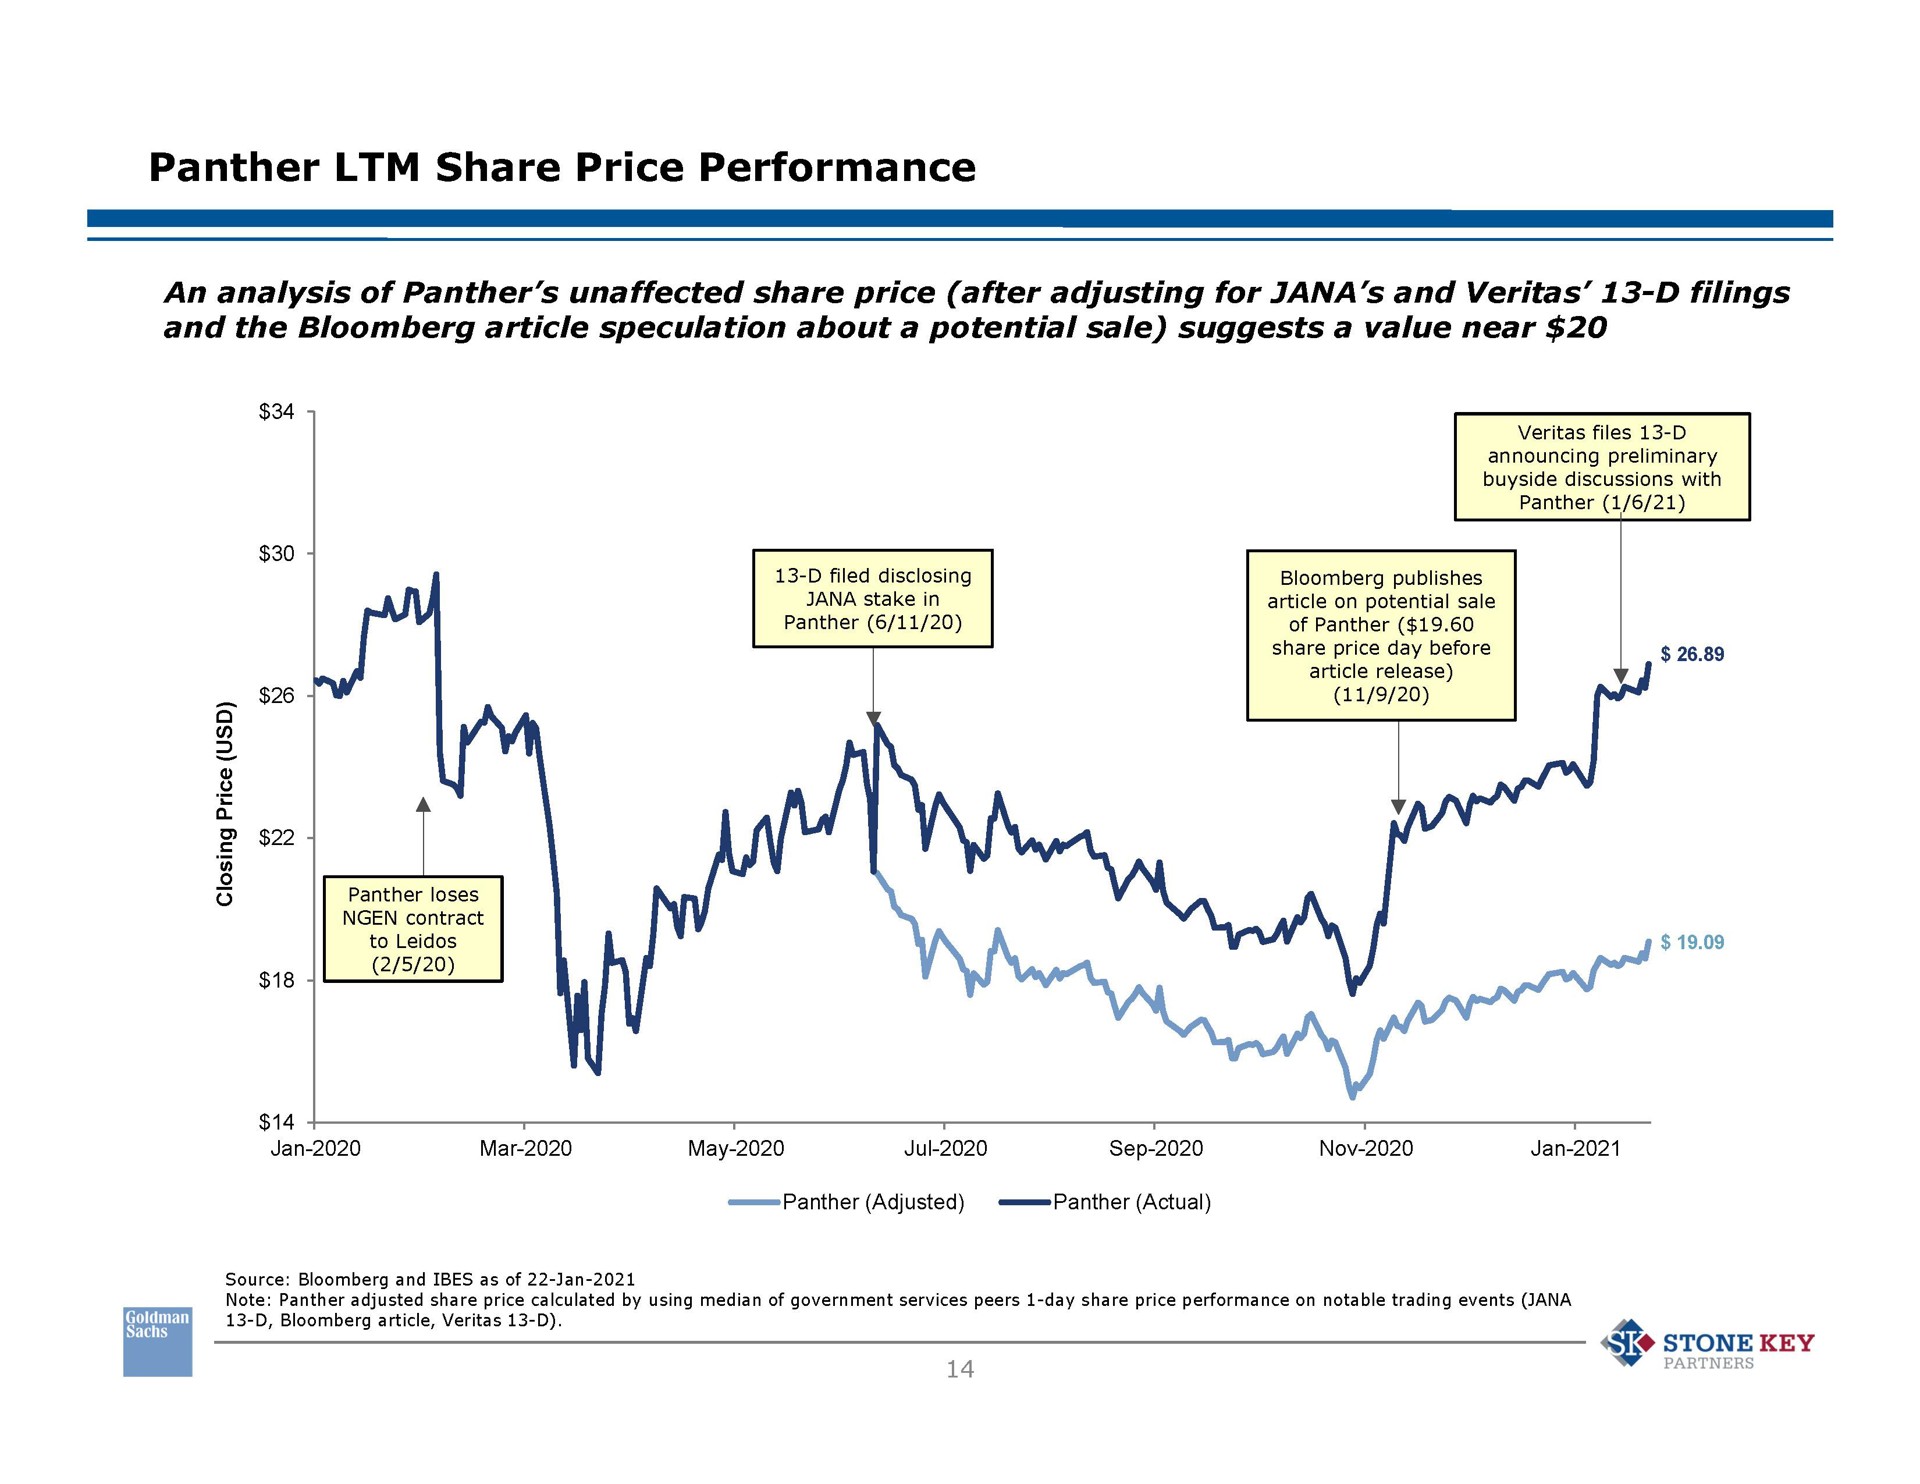 panther share price performance an analysis of panther unaffected share price after adjusting for and filings and the article speculation about a potential sale suggests a value near a a files announcing preliminary share price day before panther loses to mar may panther adjusted panther actual am stone key partners | Goldman Sachs